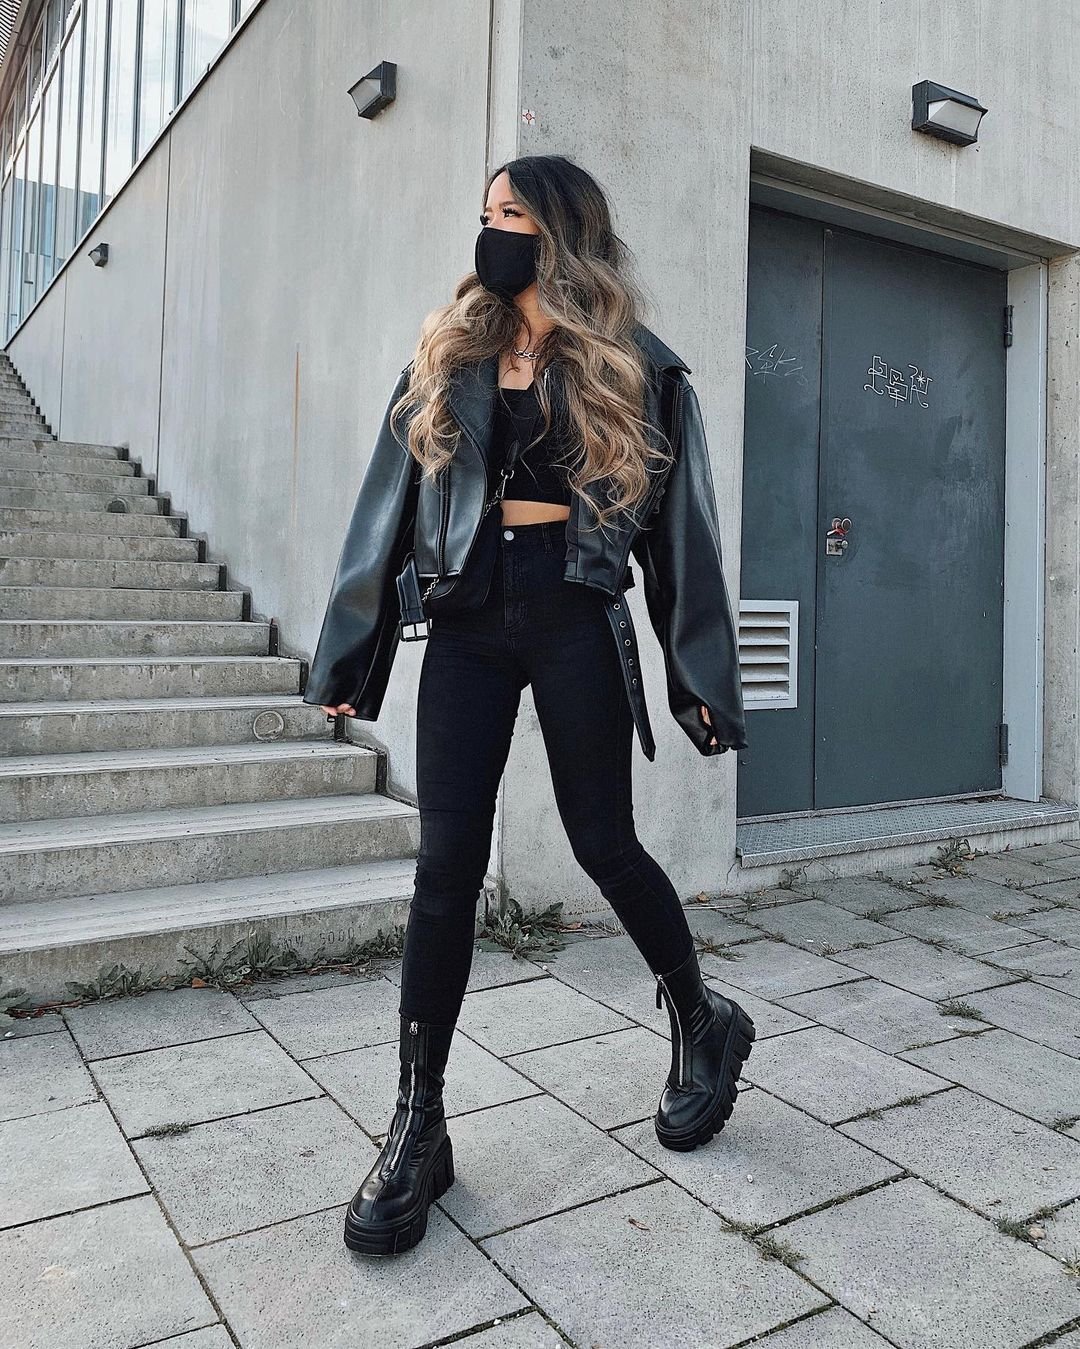 Women's Black & Stylish Outfits for different occasions. — Naa